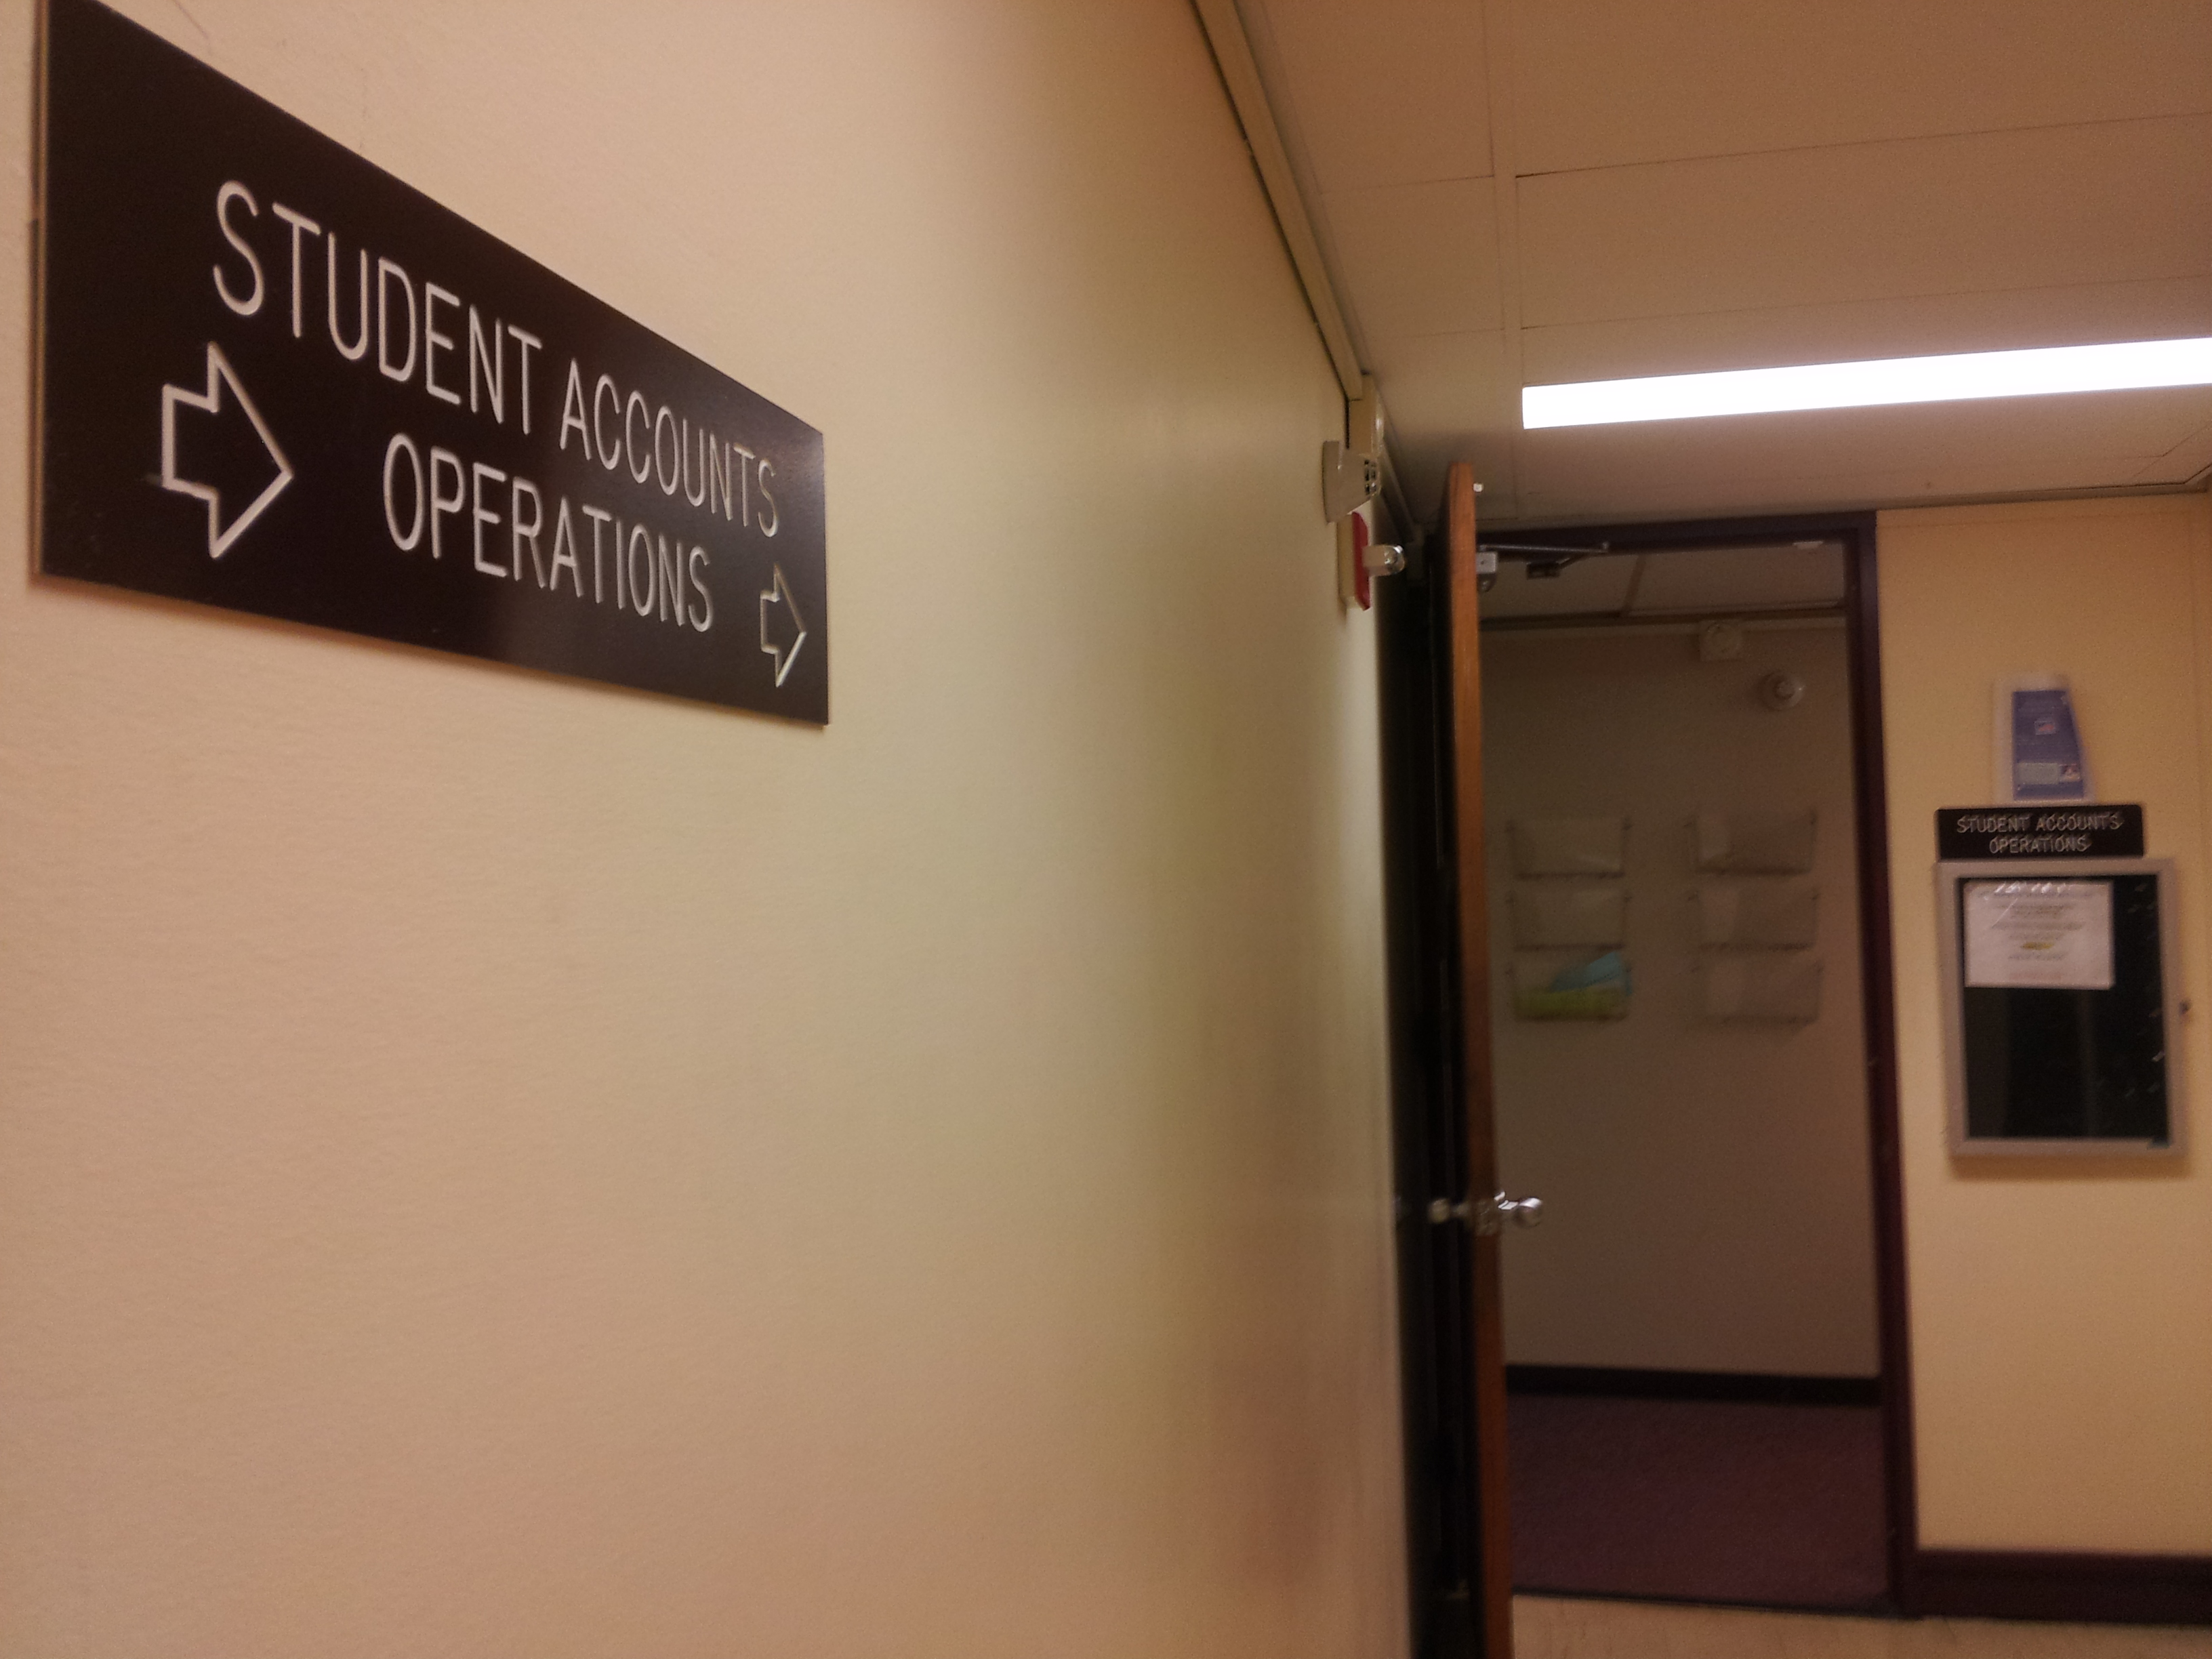 The office of Student Accounts is located on the second floor of Haggerty Administration Building. Photo by Kelly Fay.